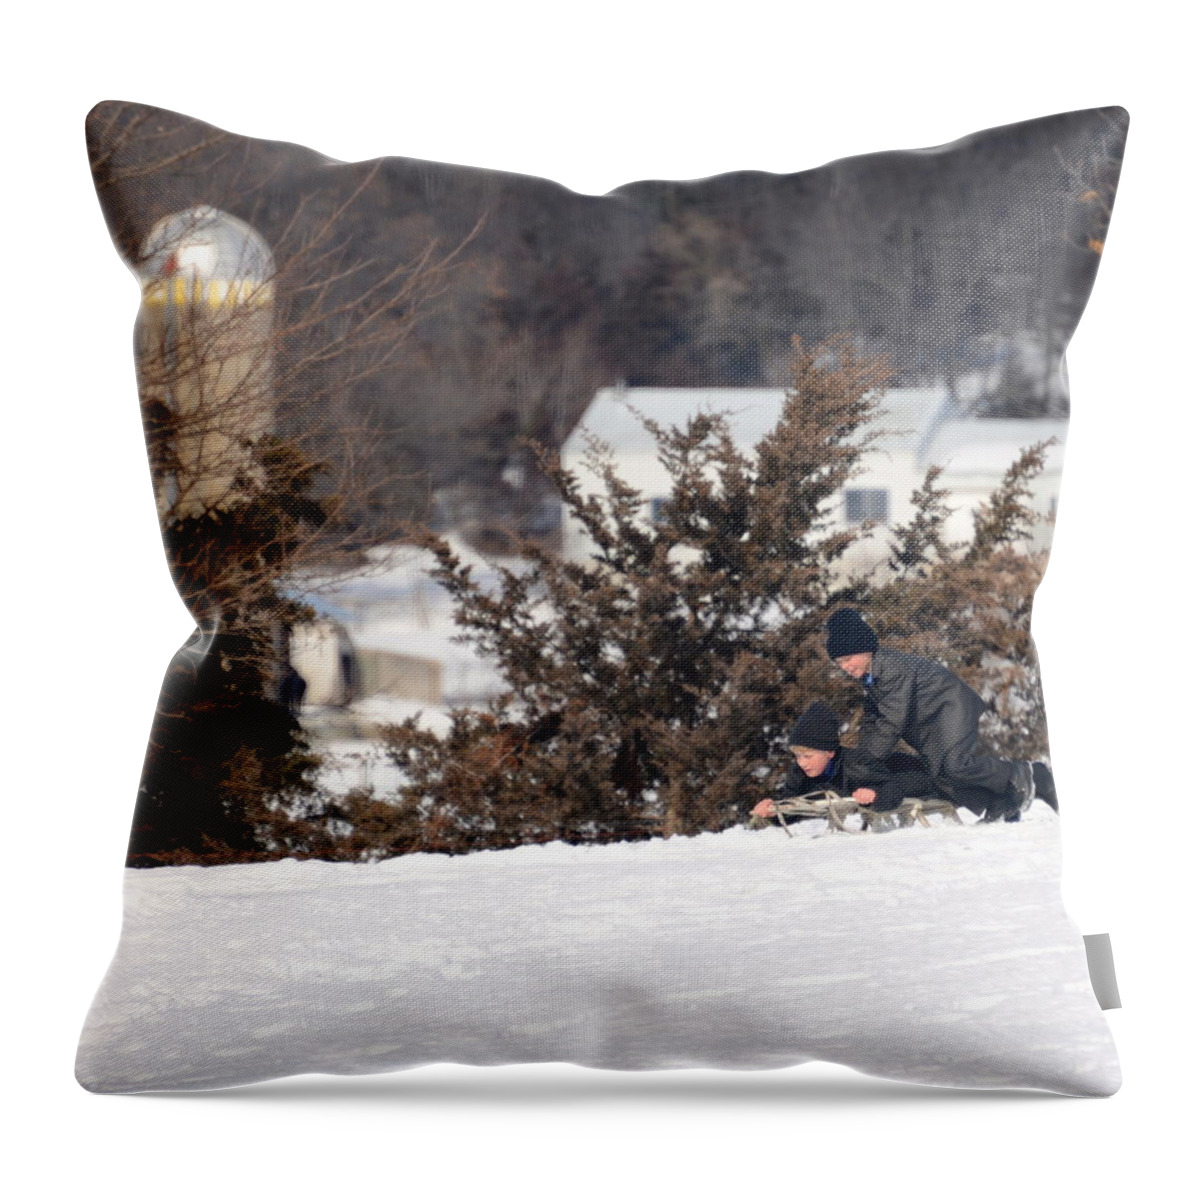 Sledding Throw Pillow featuring the photograph School's Out by Linda Mishler